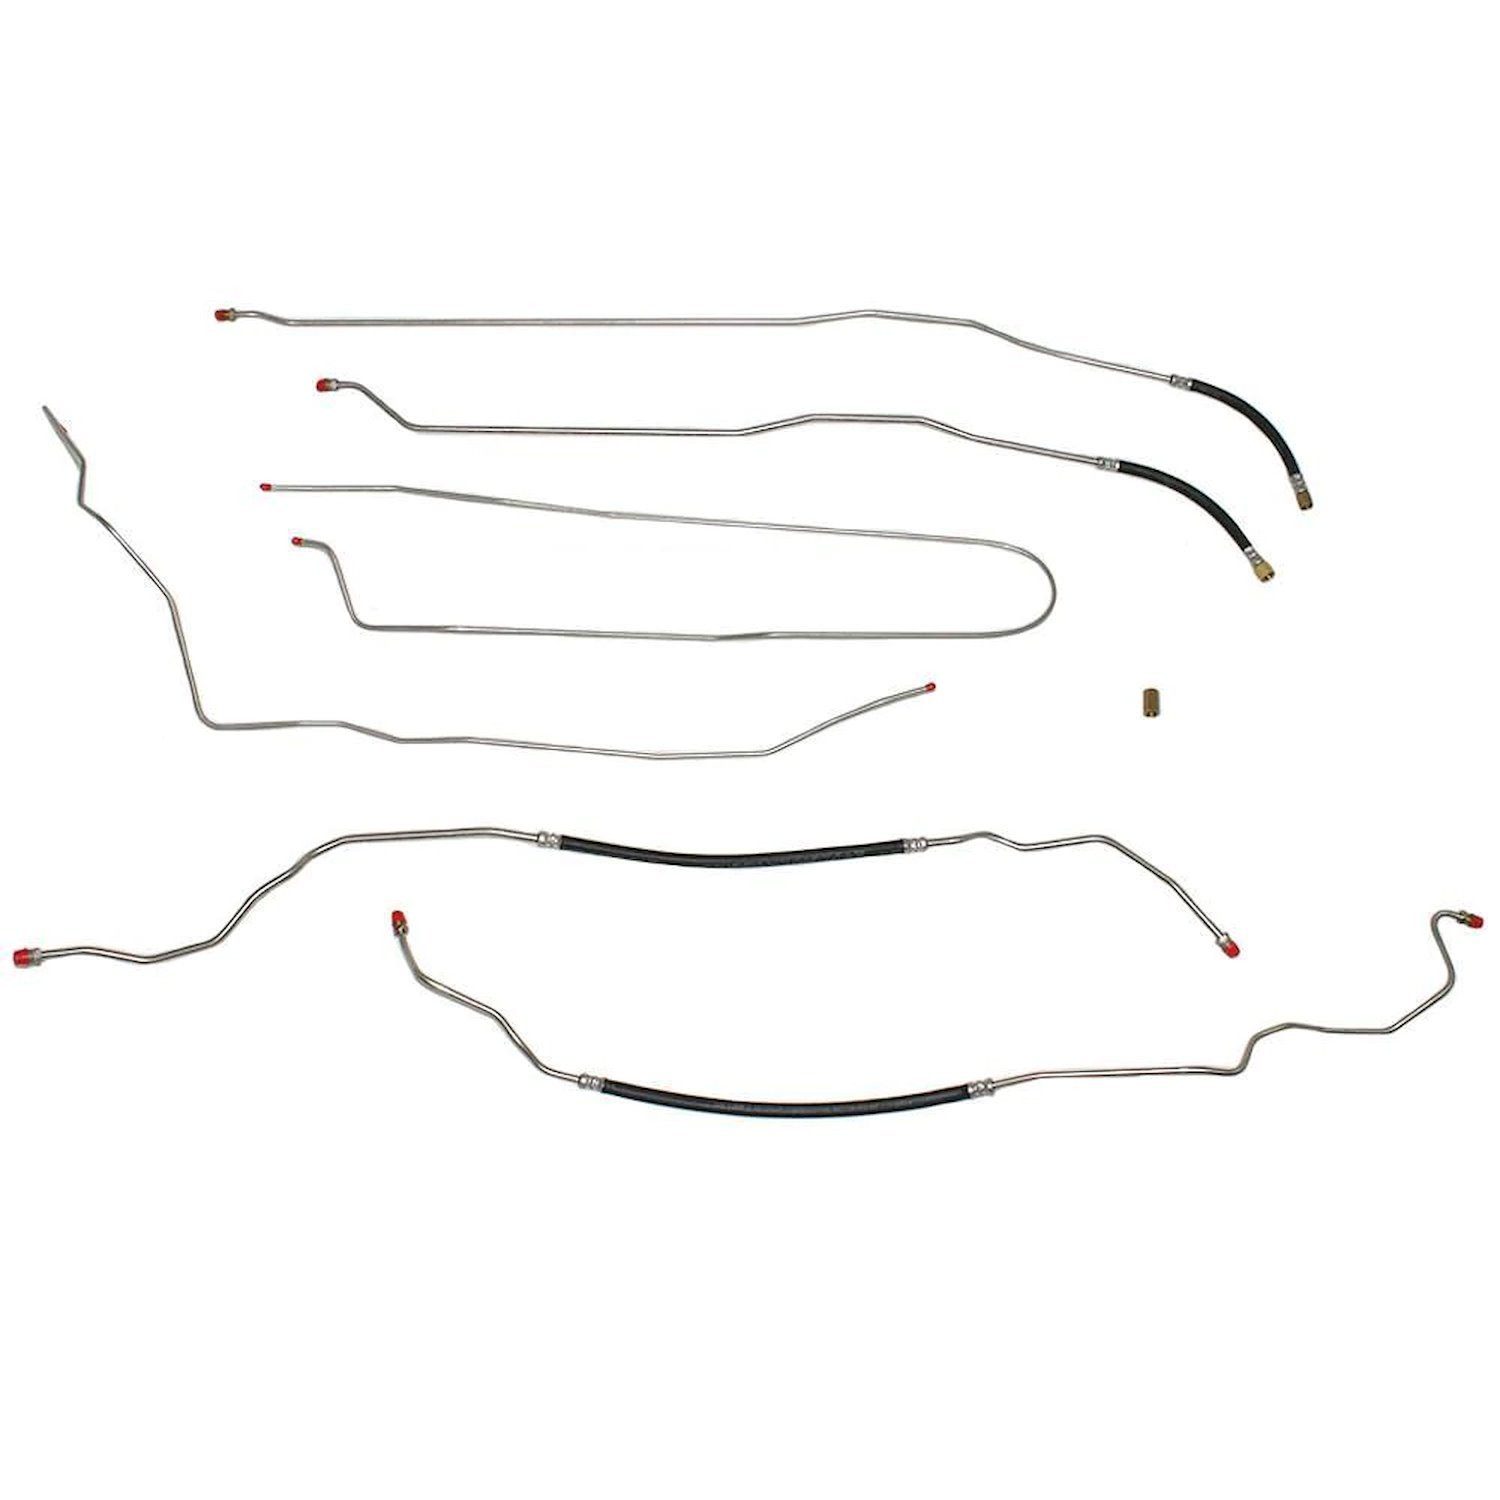 Complete Fuel Line Kit for 1996-1999 GMC Yukon